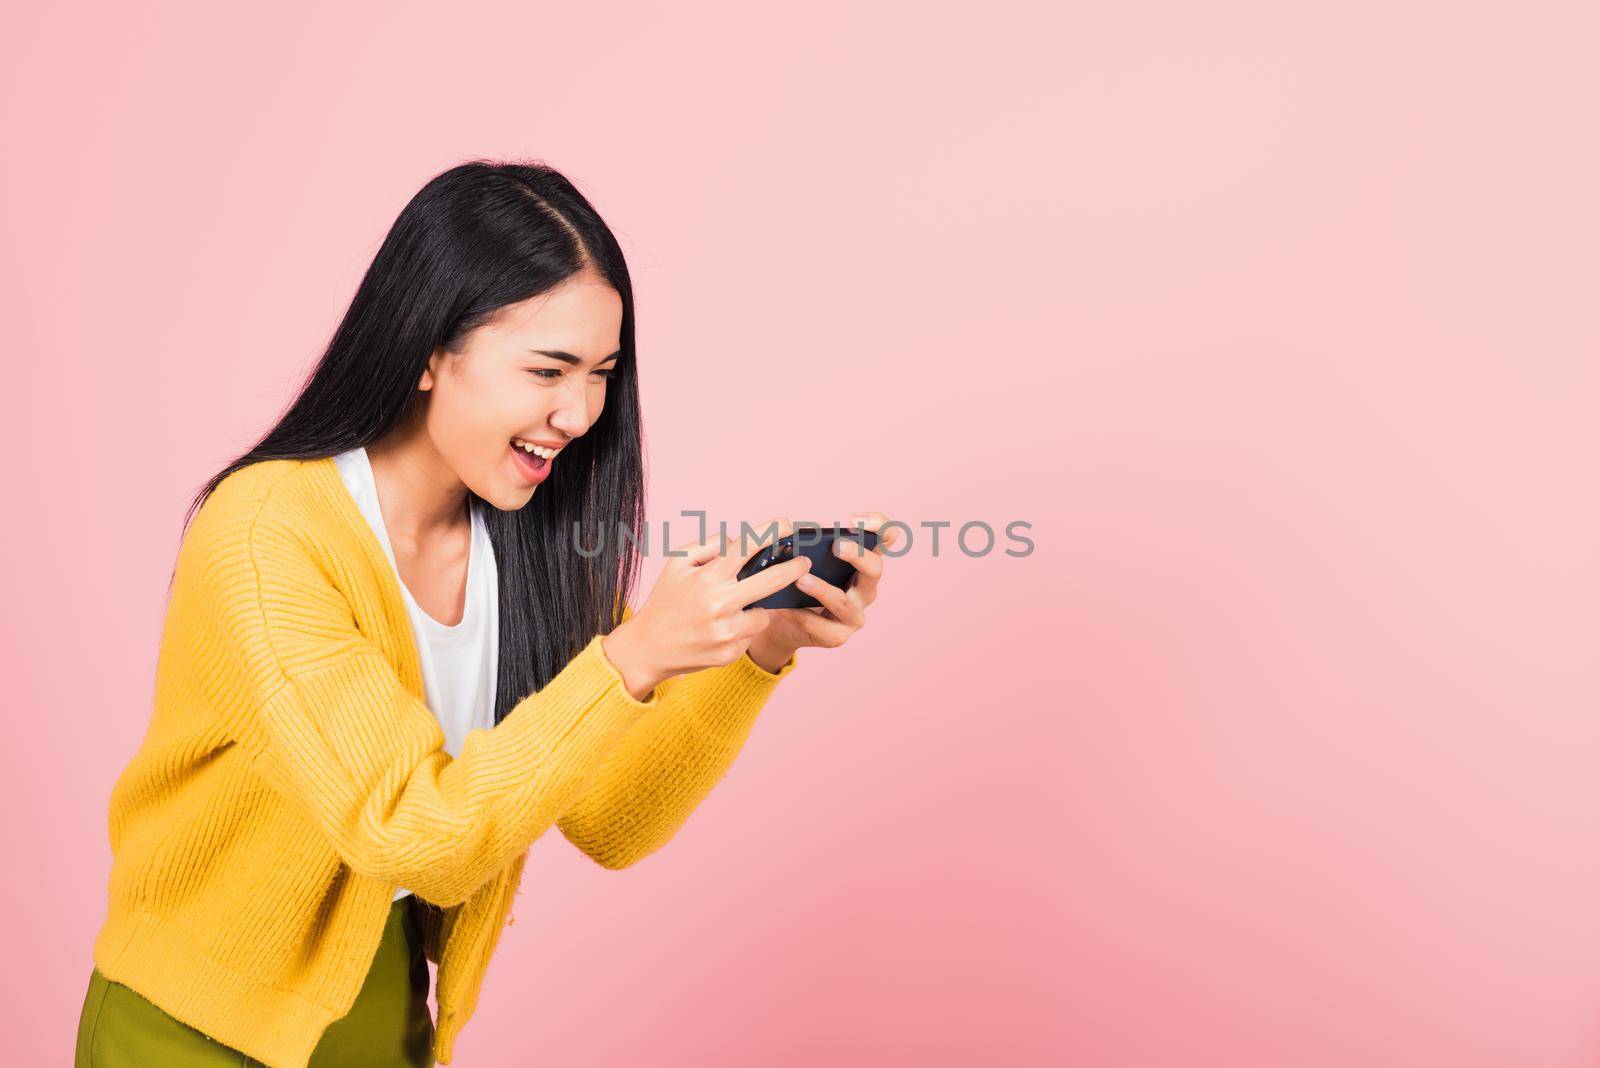 woman teen smiling excited   using mobile phone say yes!  by Sorapop